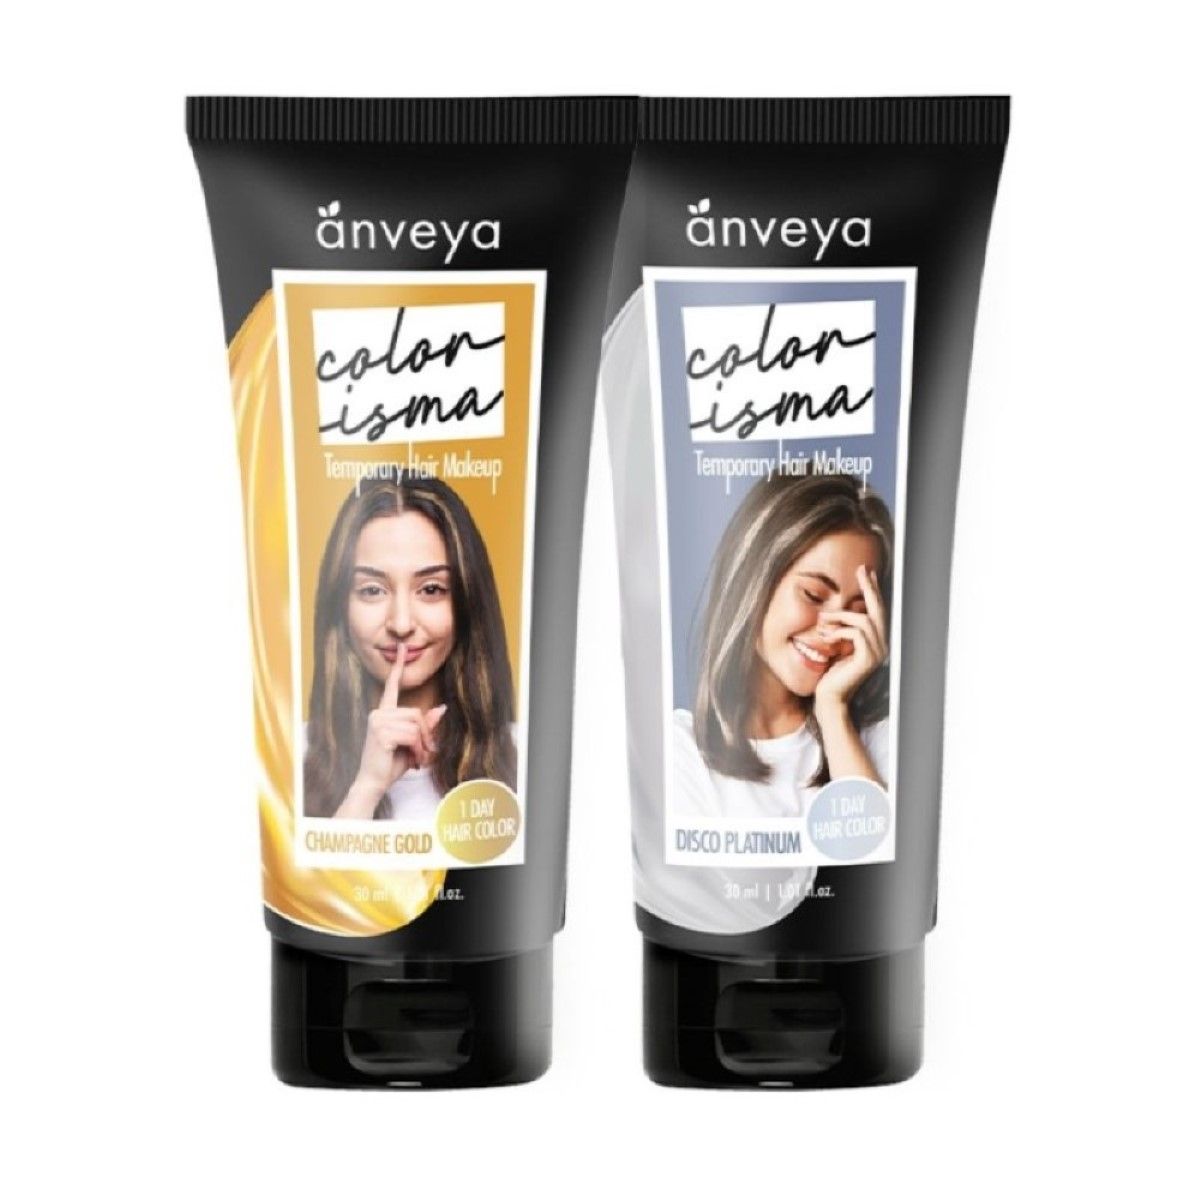 Buy Anveya Colorisma Champagne Gold and Disco Platinum, 30ml eah - Purplle